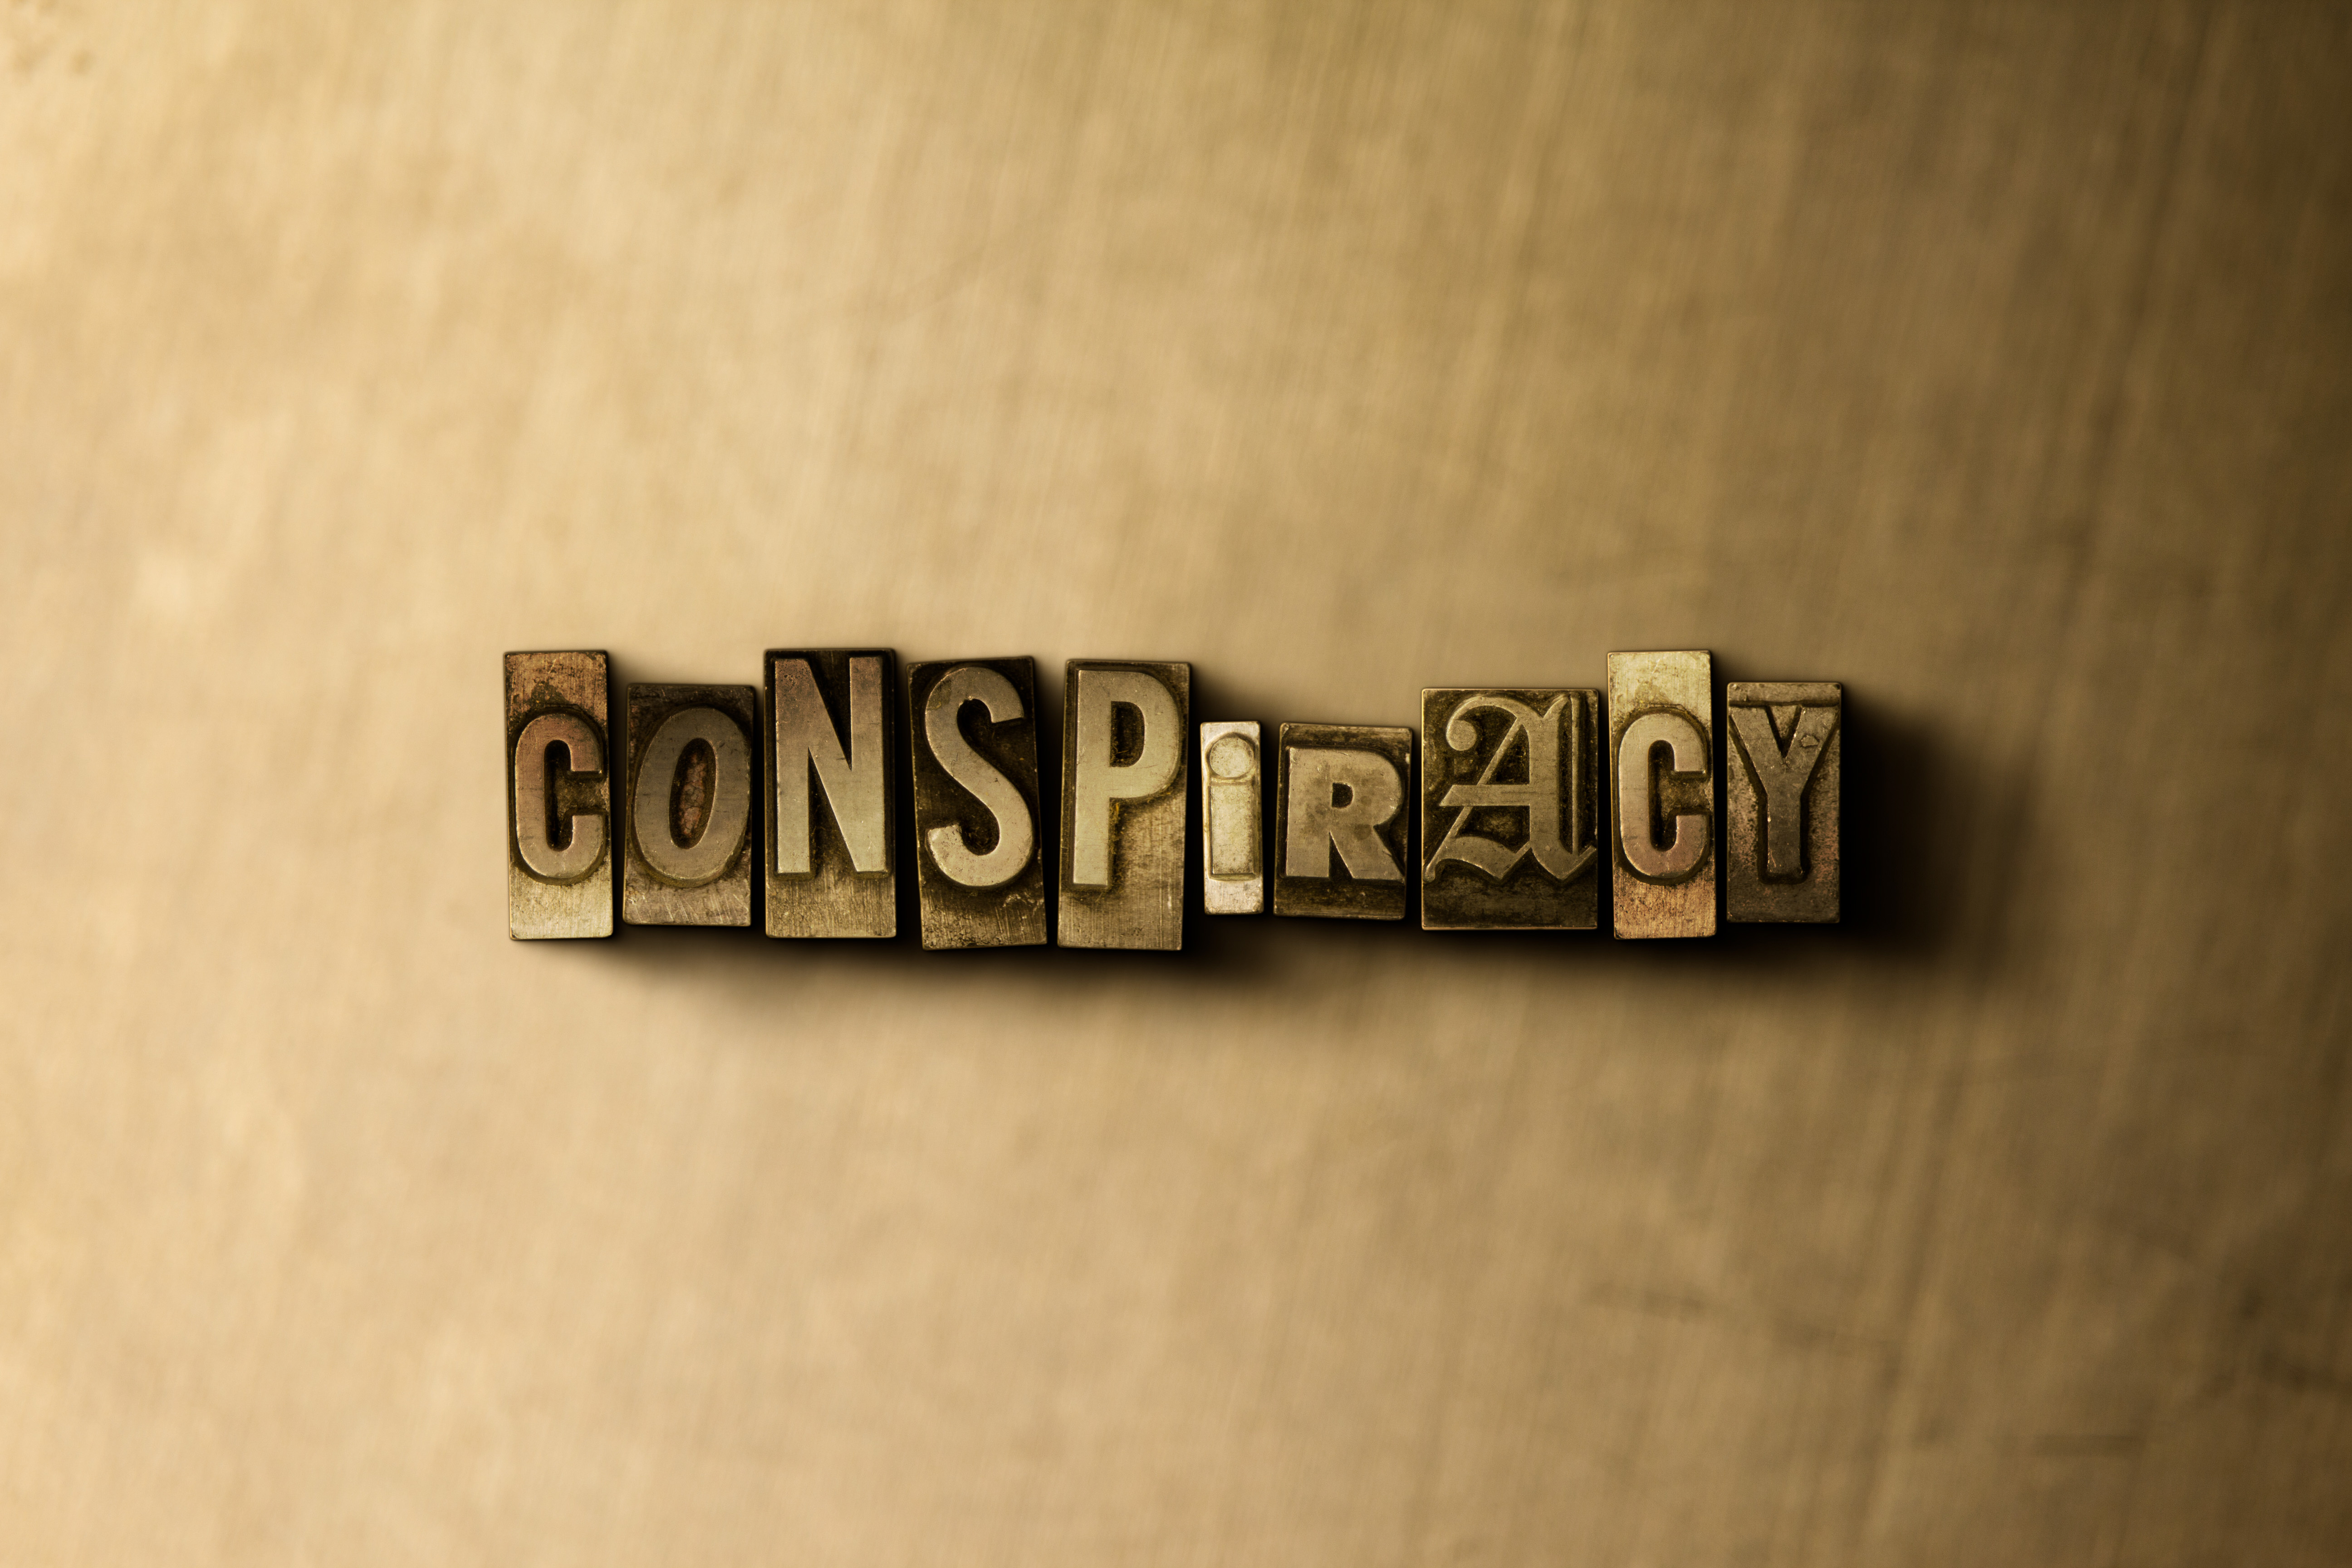 Conspiracy letters on wooden background image.jpeg